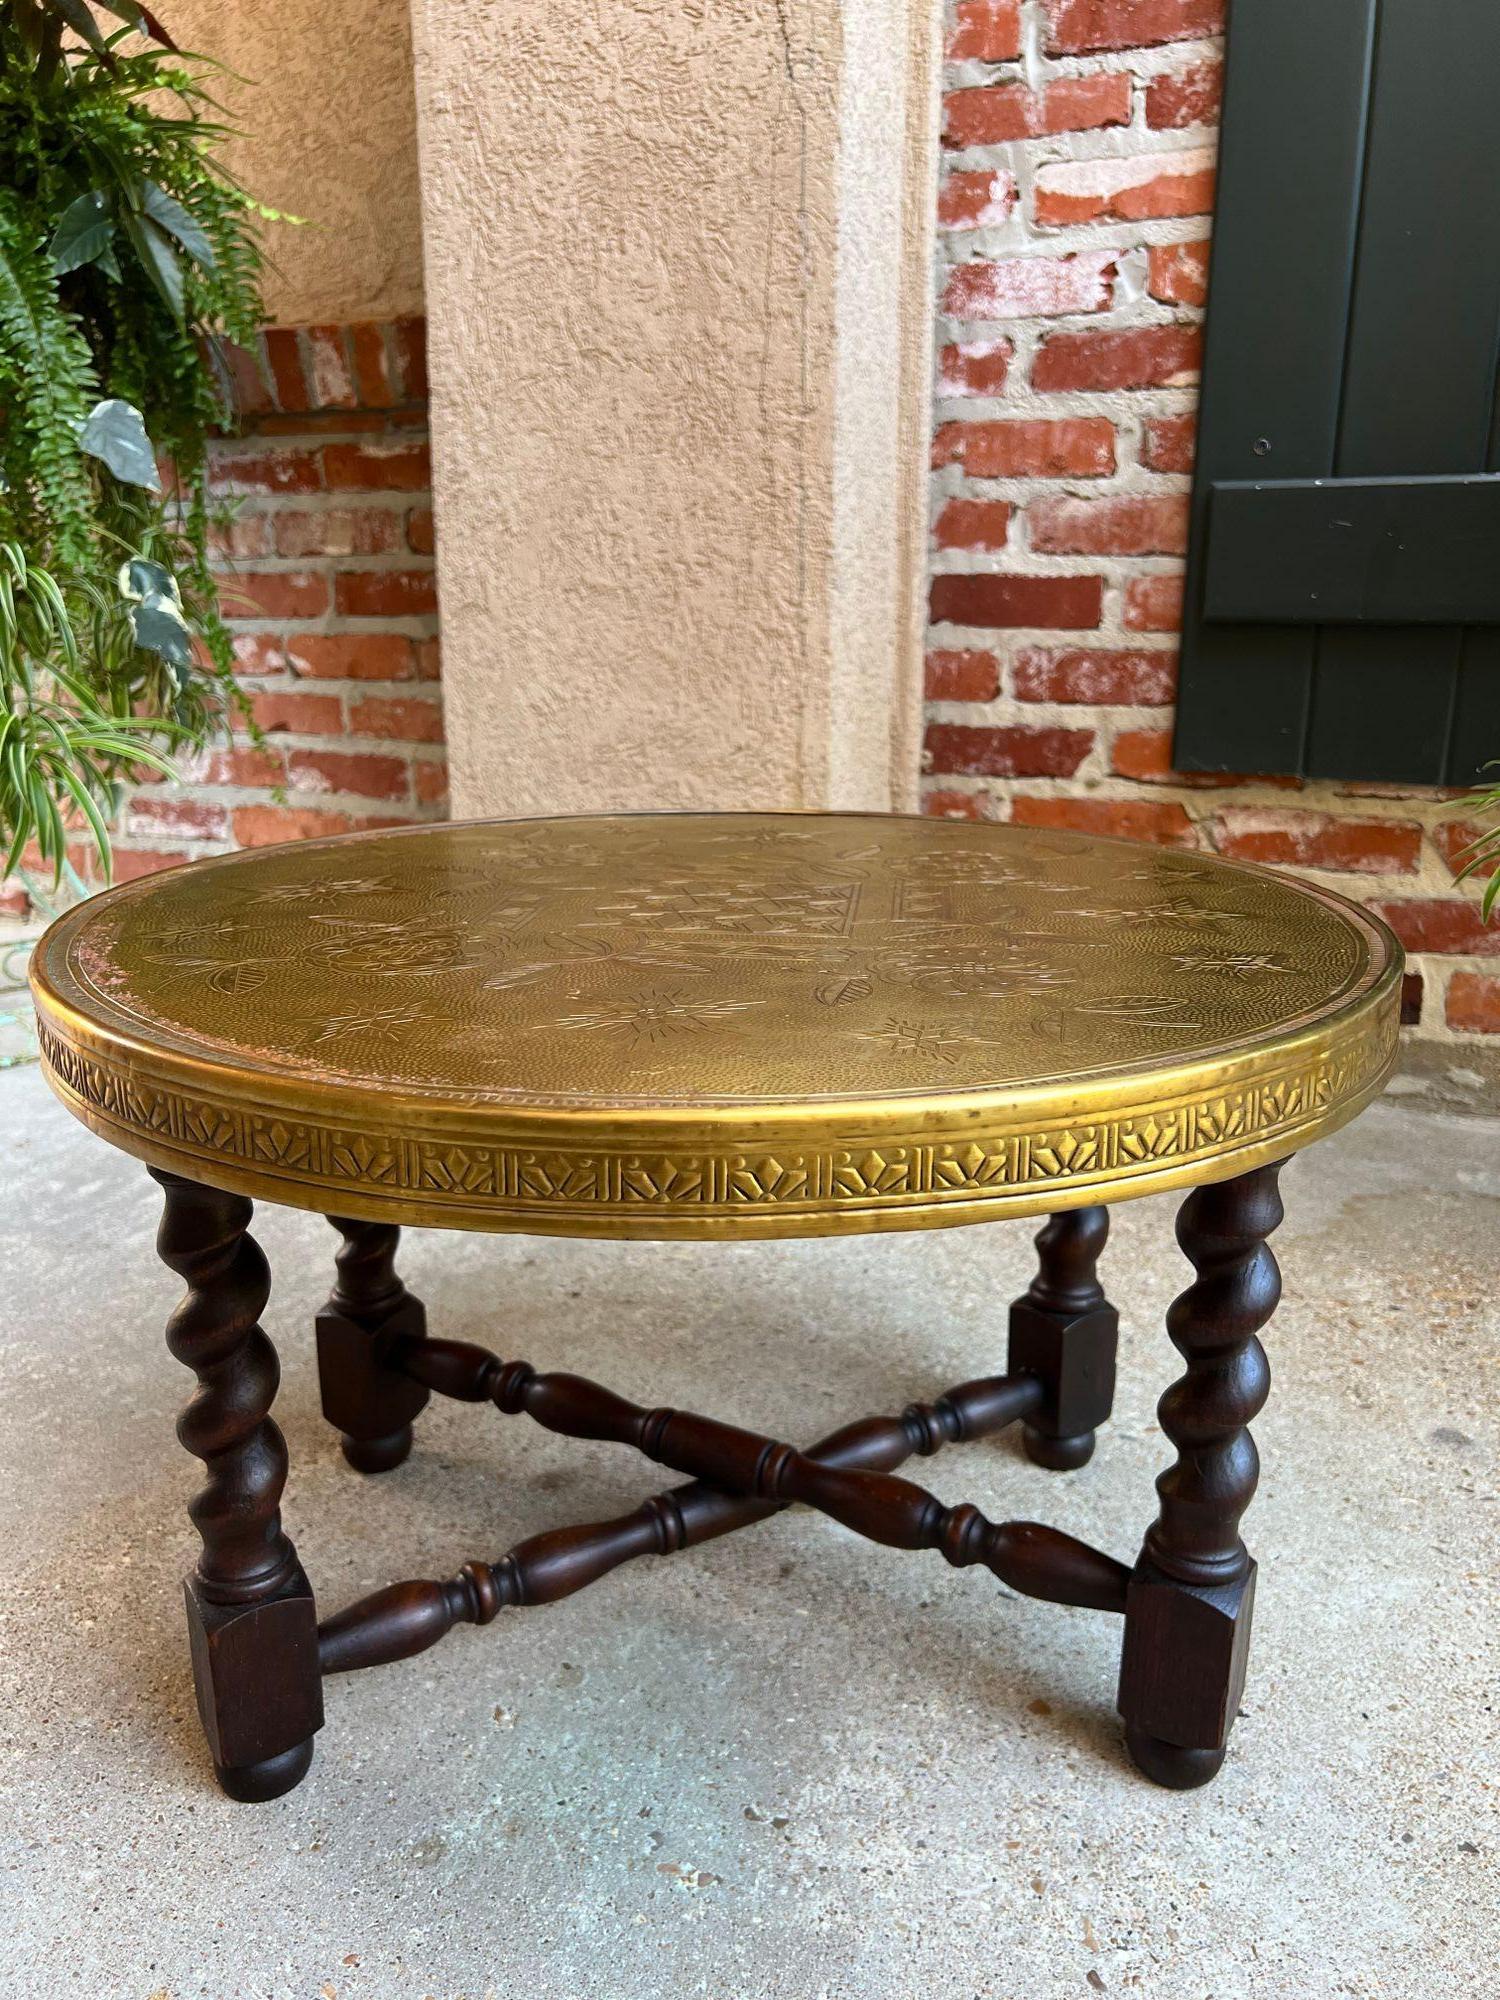 Vintage English Round Brass Coffee Tea Wine Table with Folding Barley Twist Base.
 
Direct from English, a versatile FOLDING TABLE, great as a coffee table or end table, and perfect as an accent piece. Round brass table top has etched design